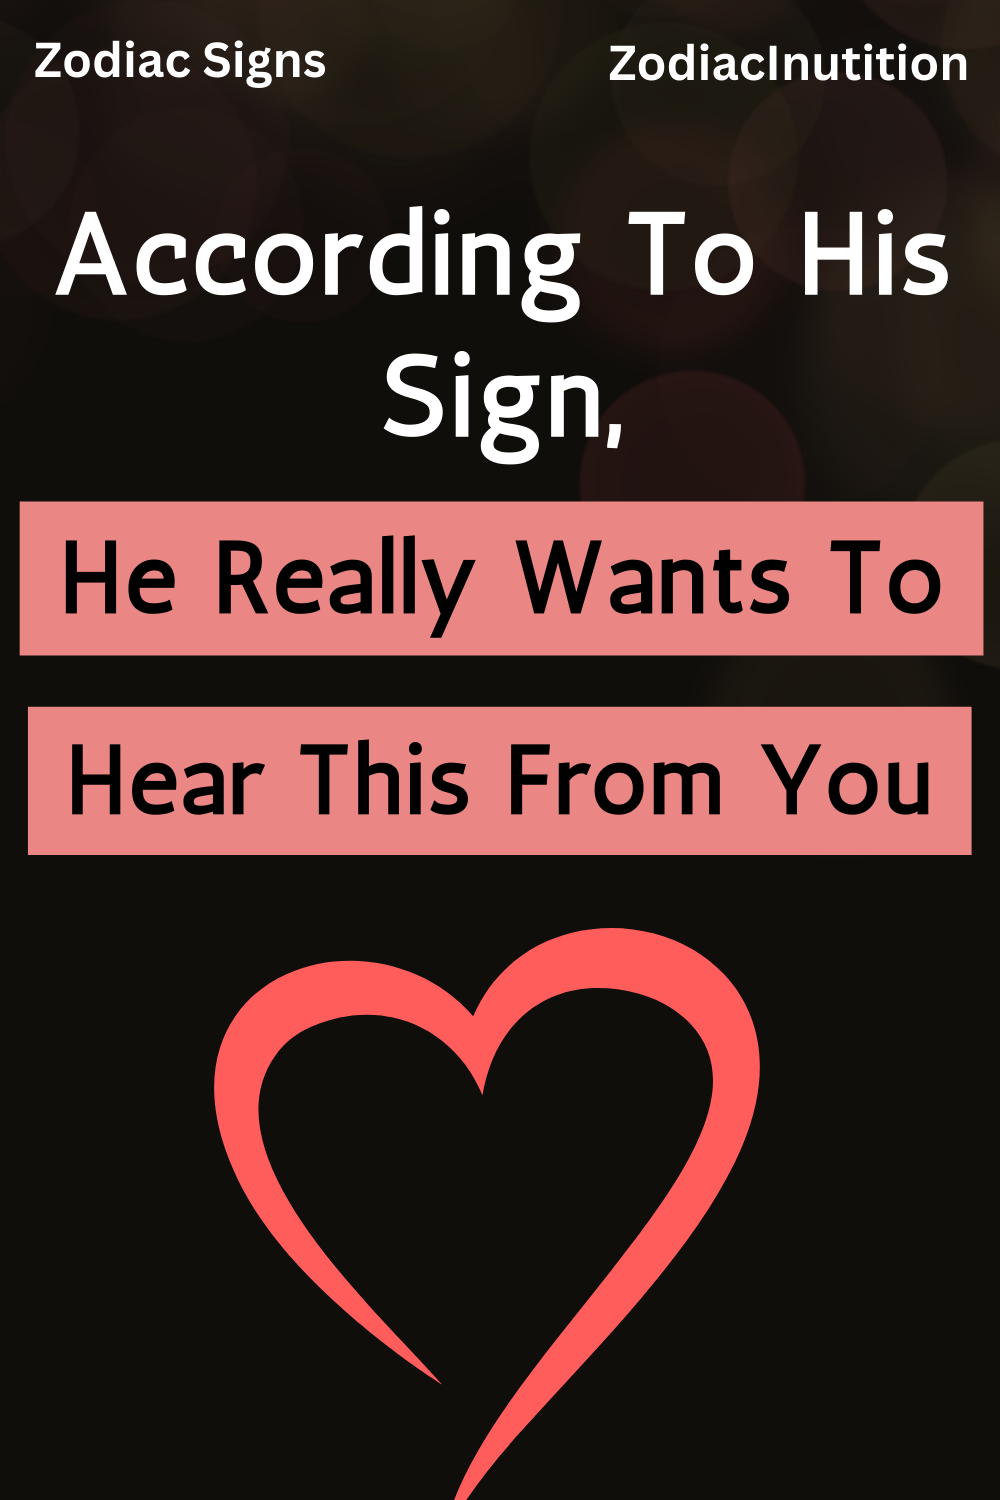 According To His Sign, He Really Wants To Hear This From You